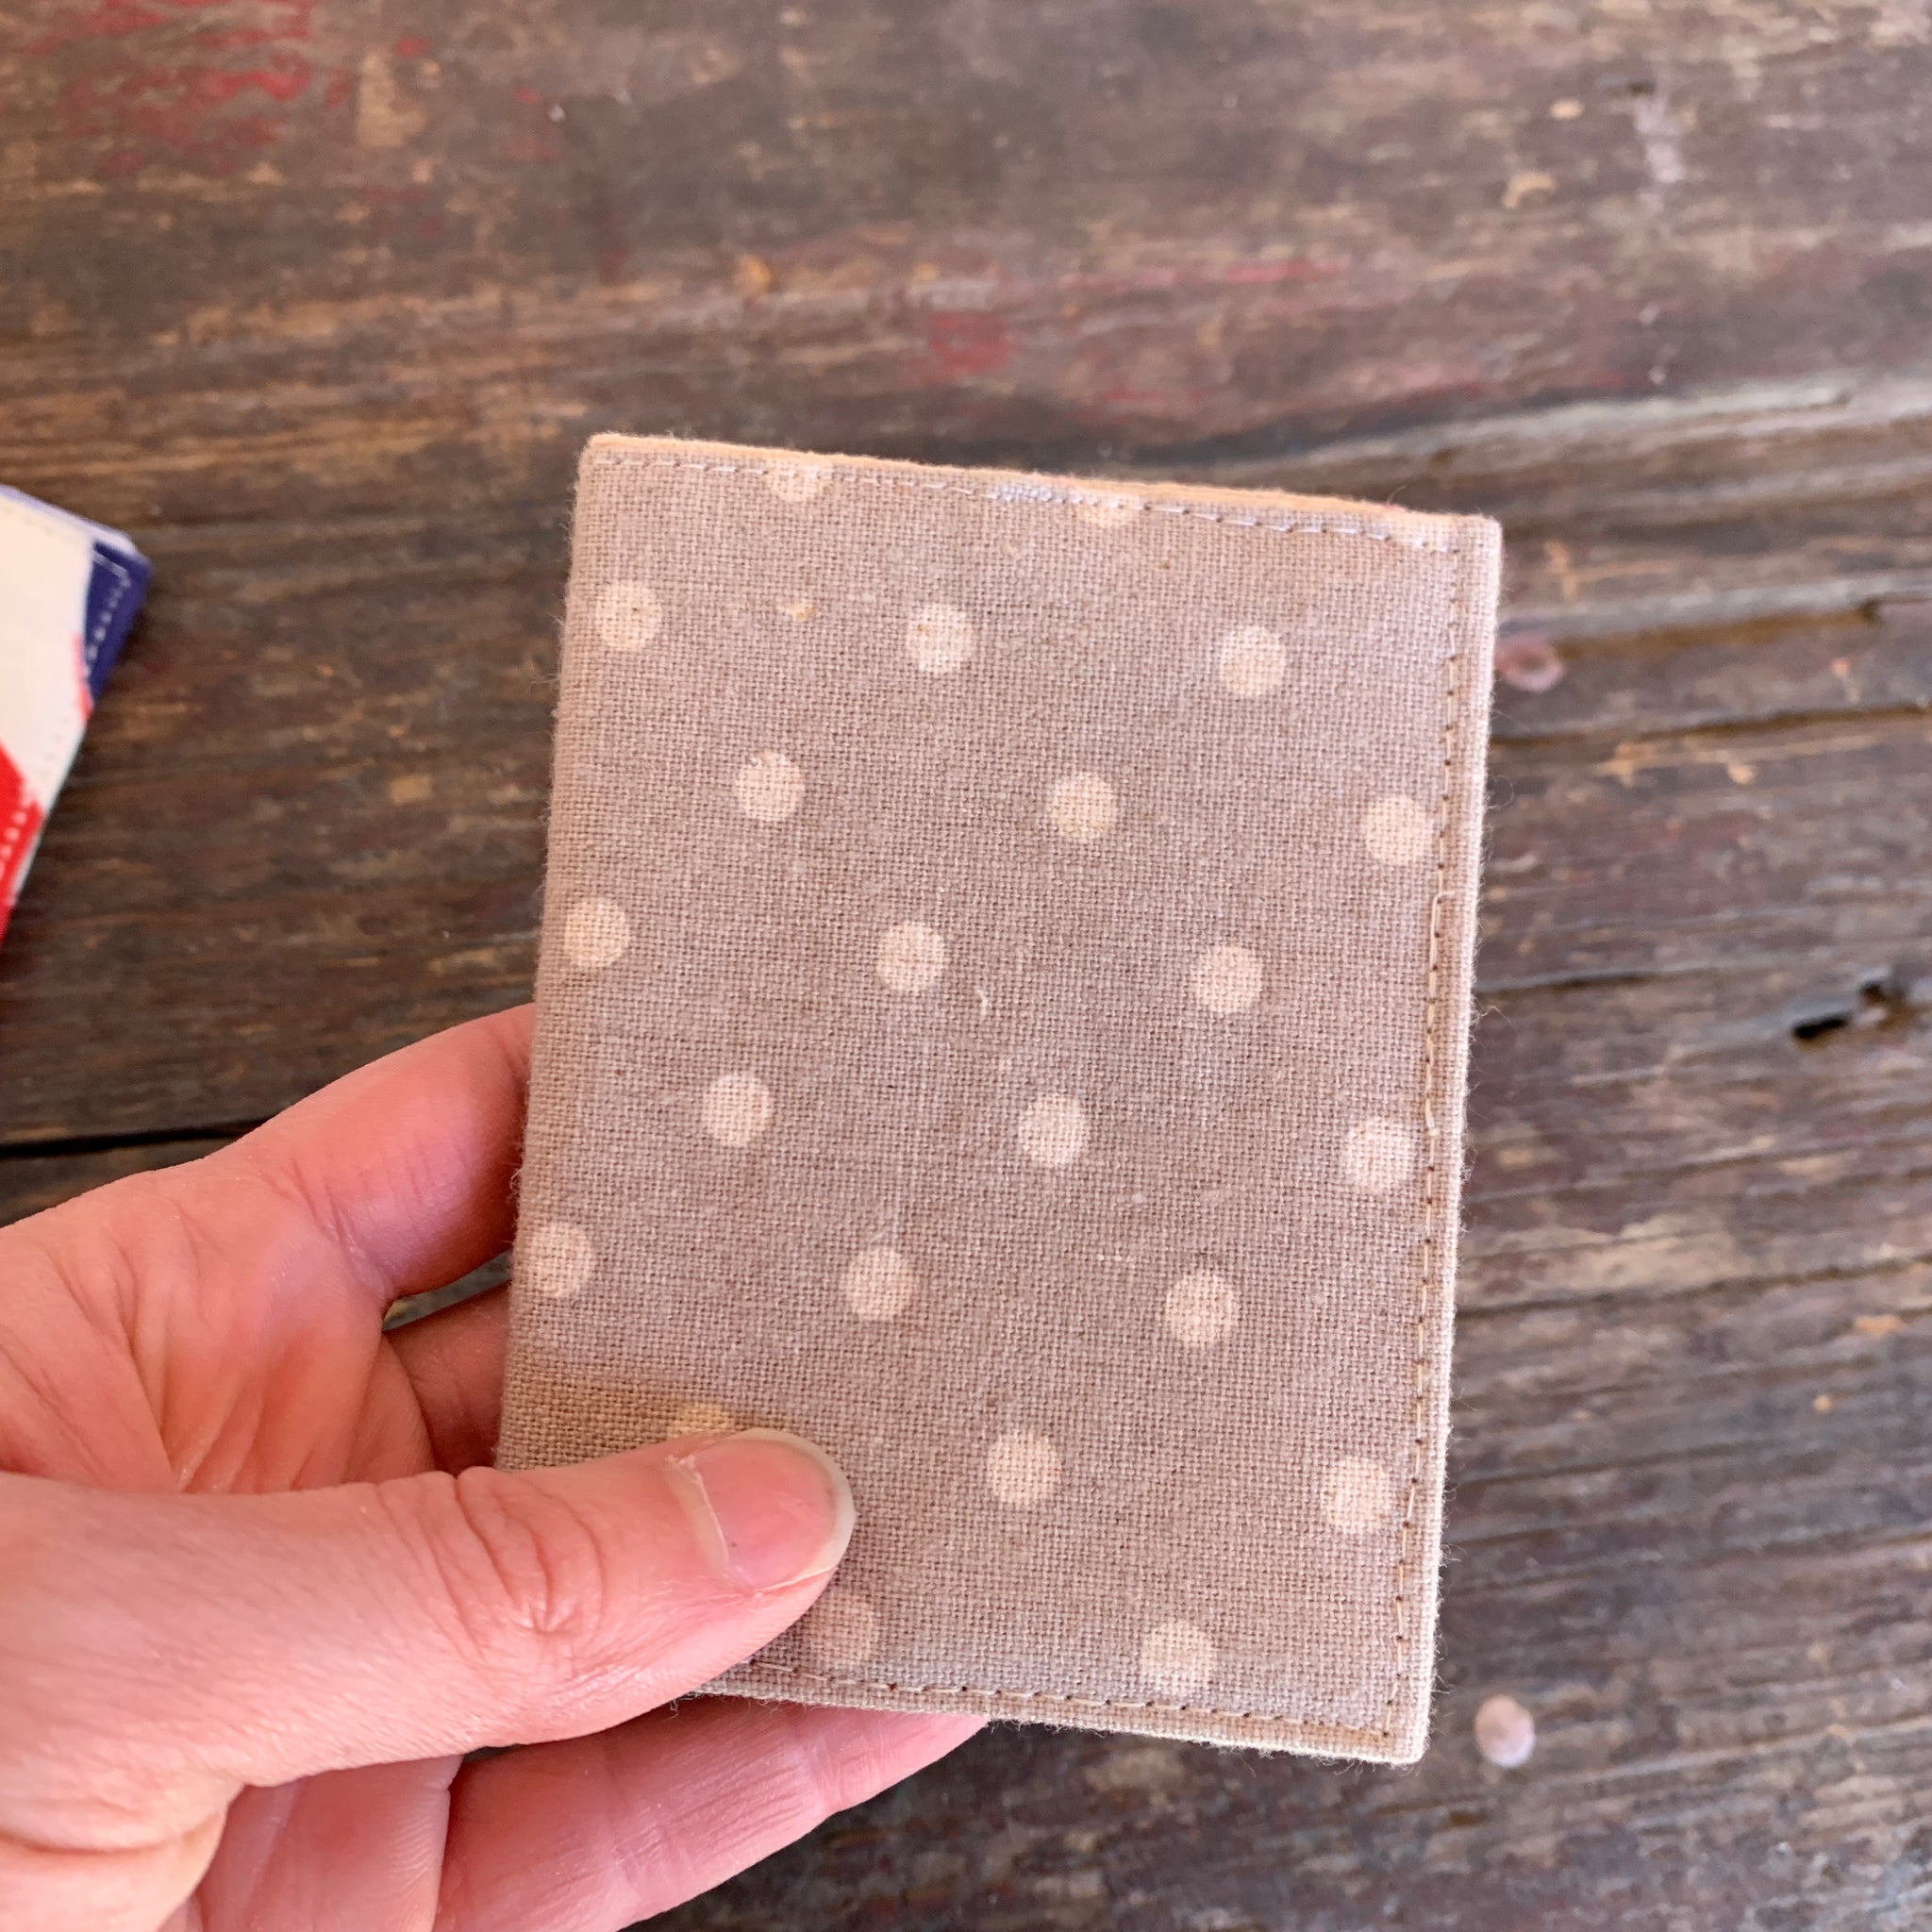 Grey with white polka dots handmade vintage fabric wallet